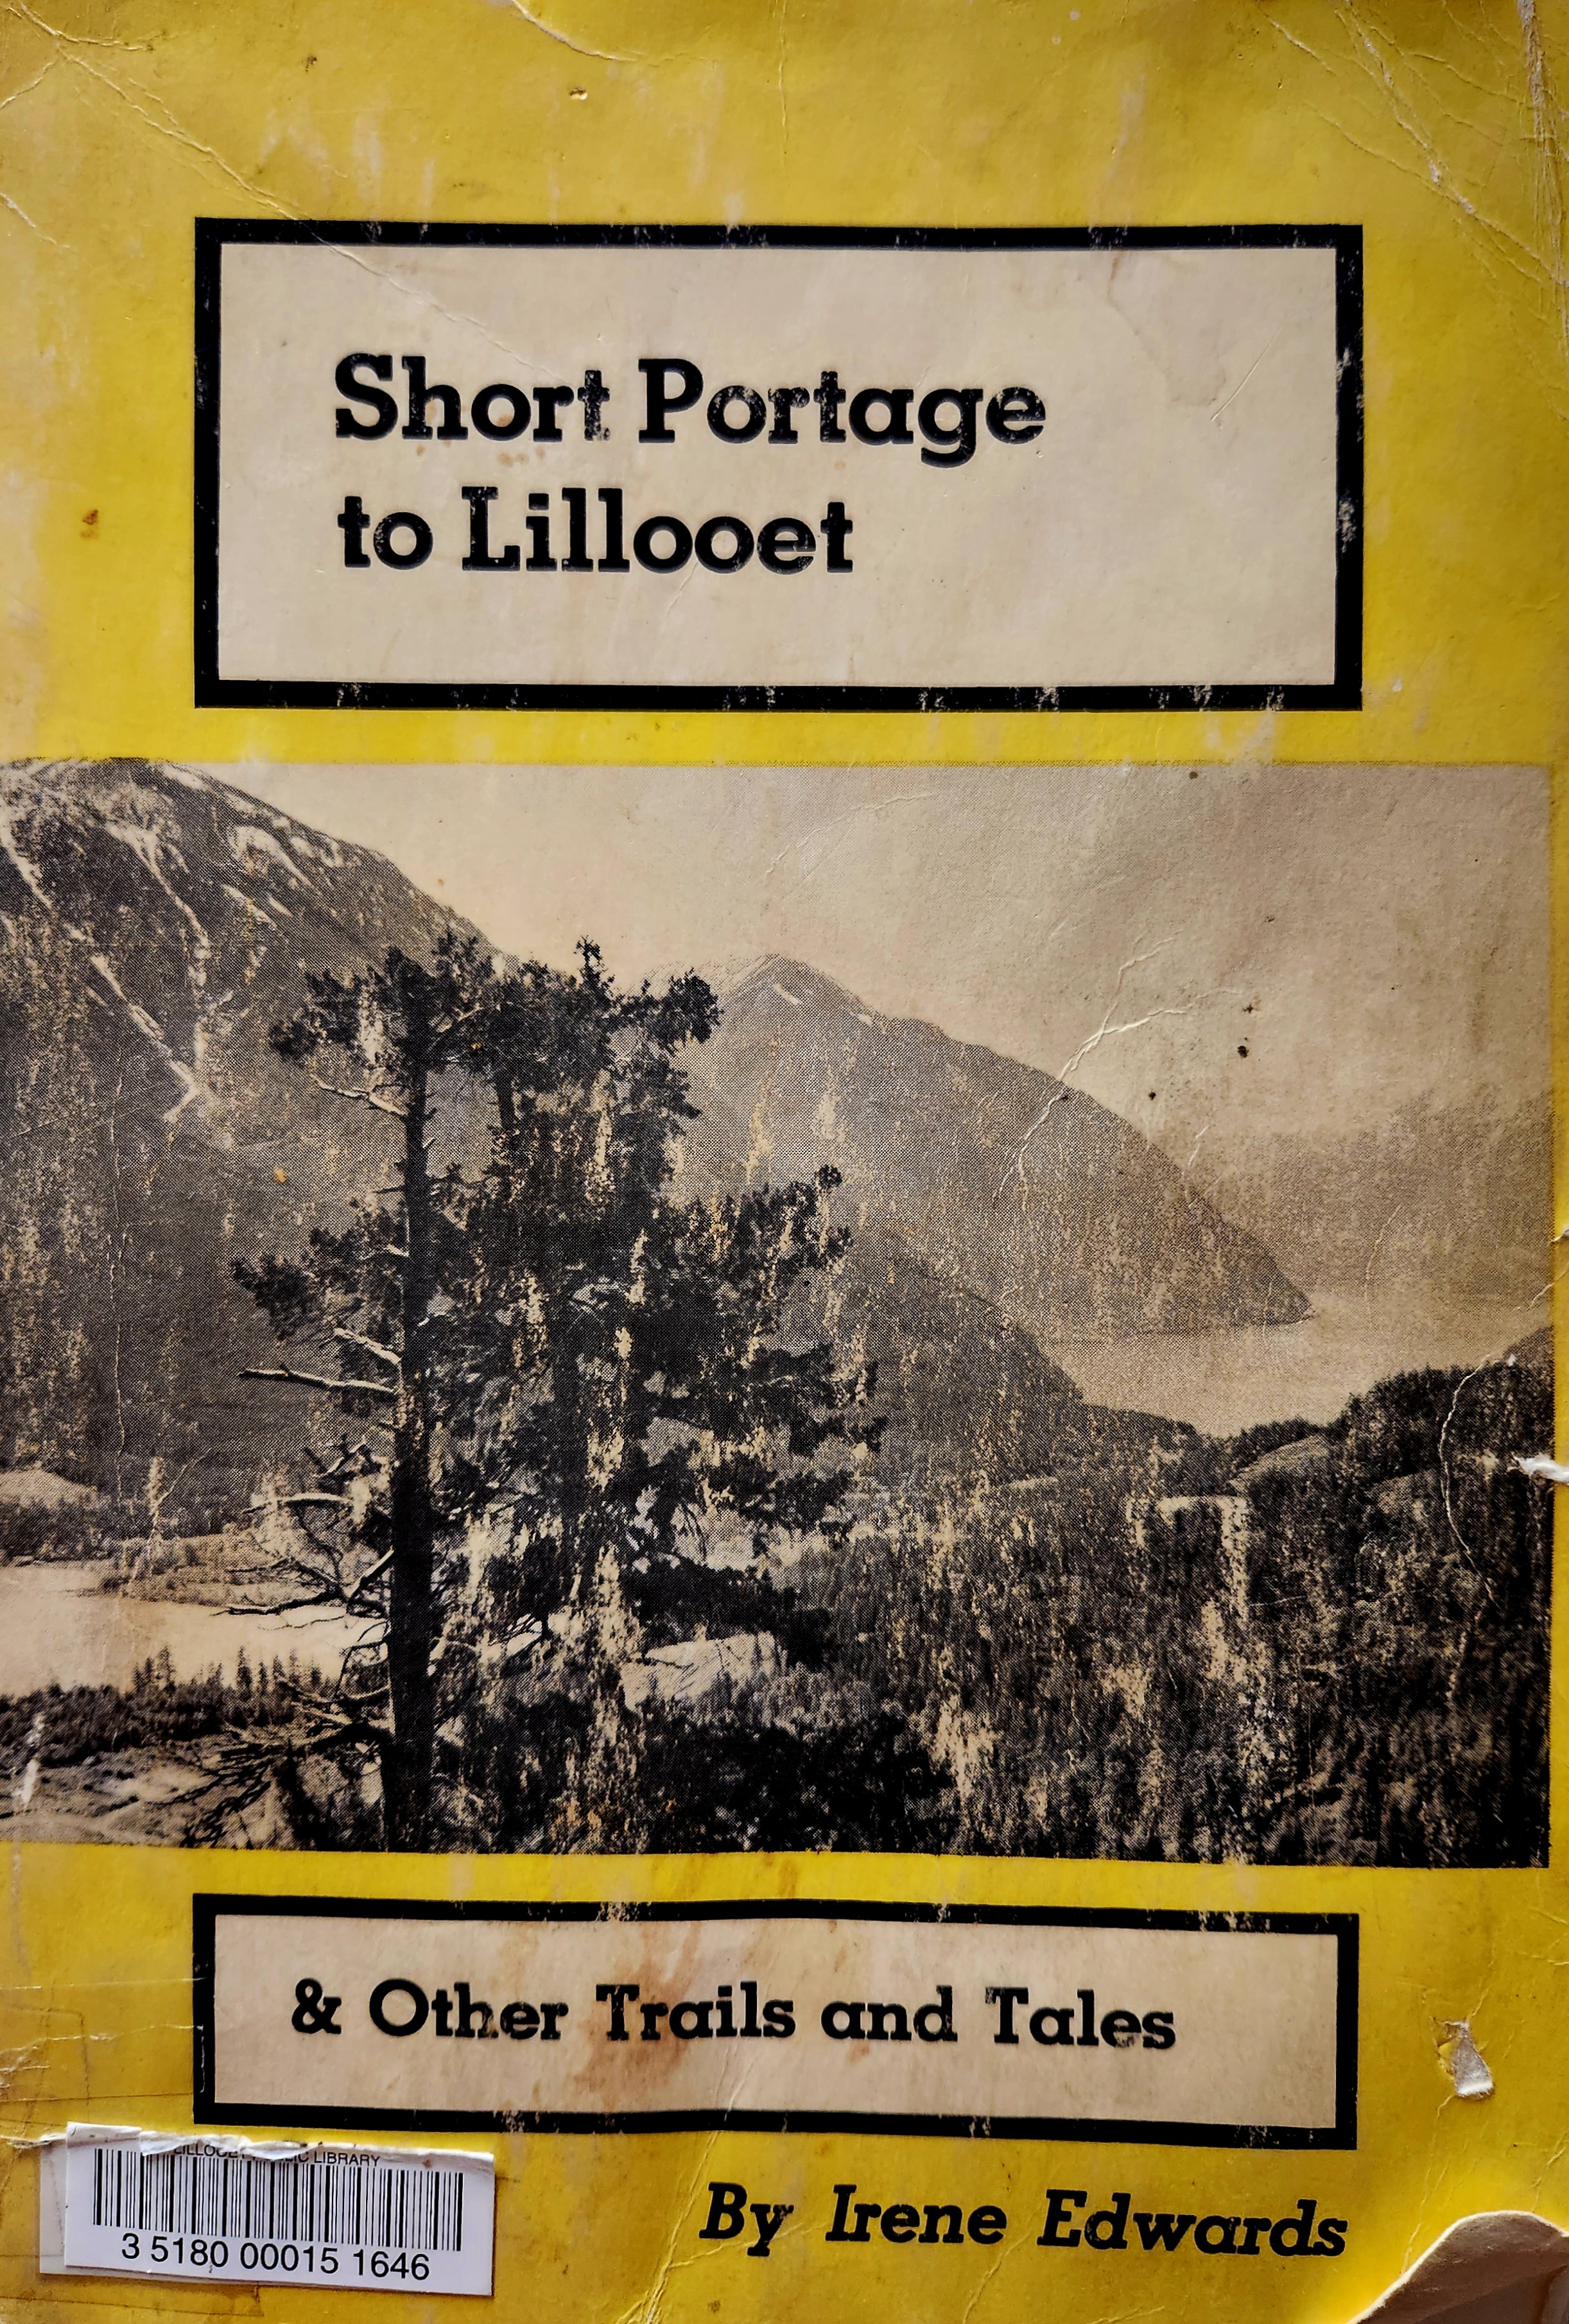 Book Cover - Short Portage to Lillooet